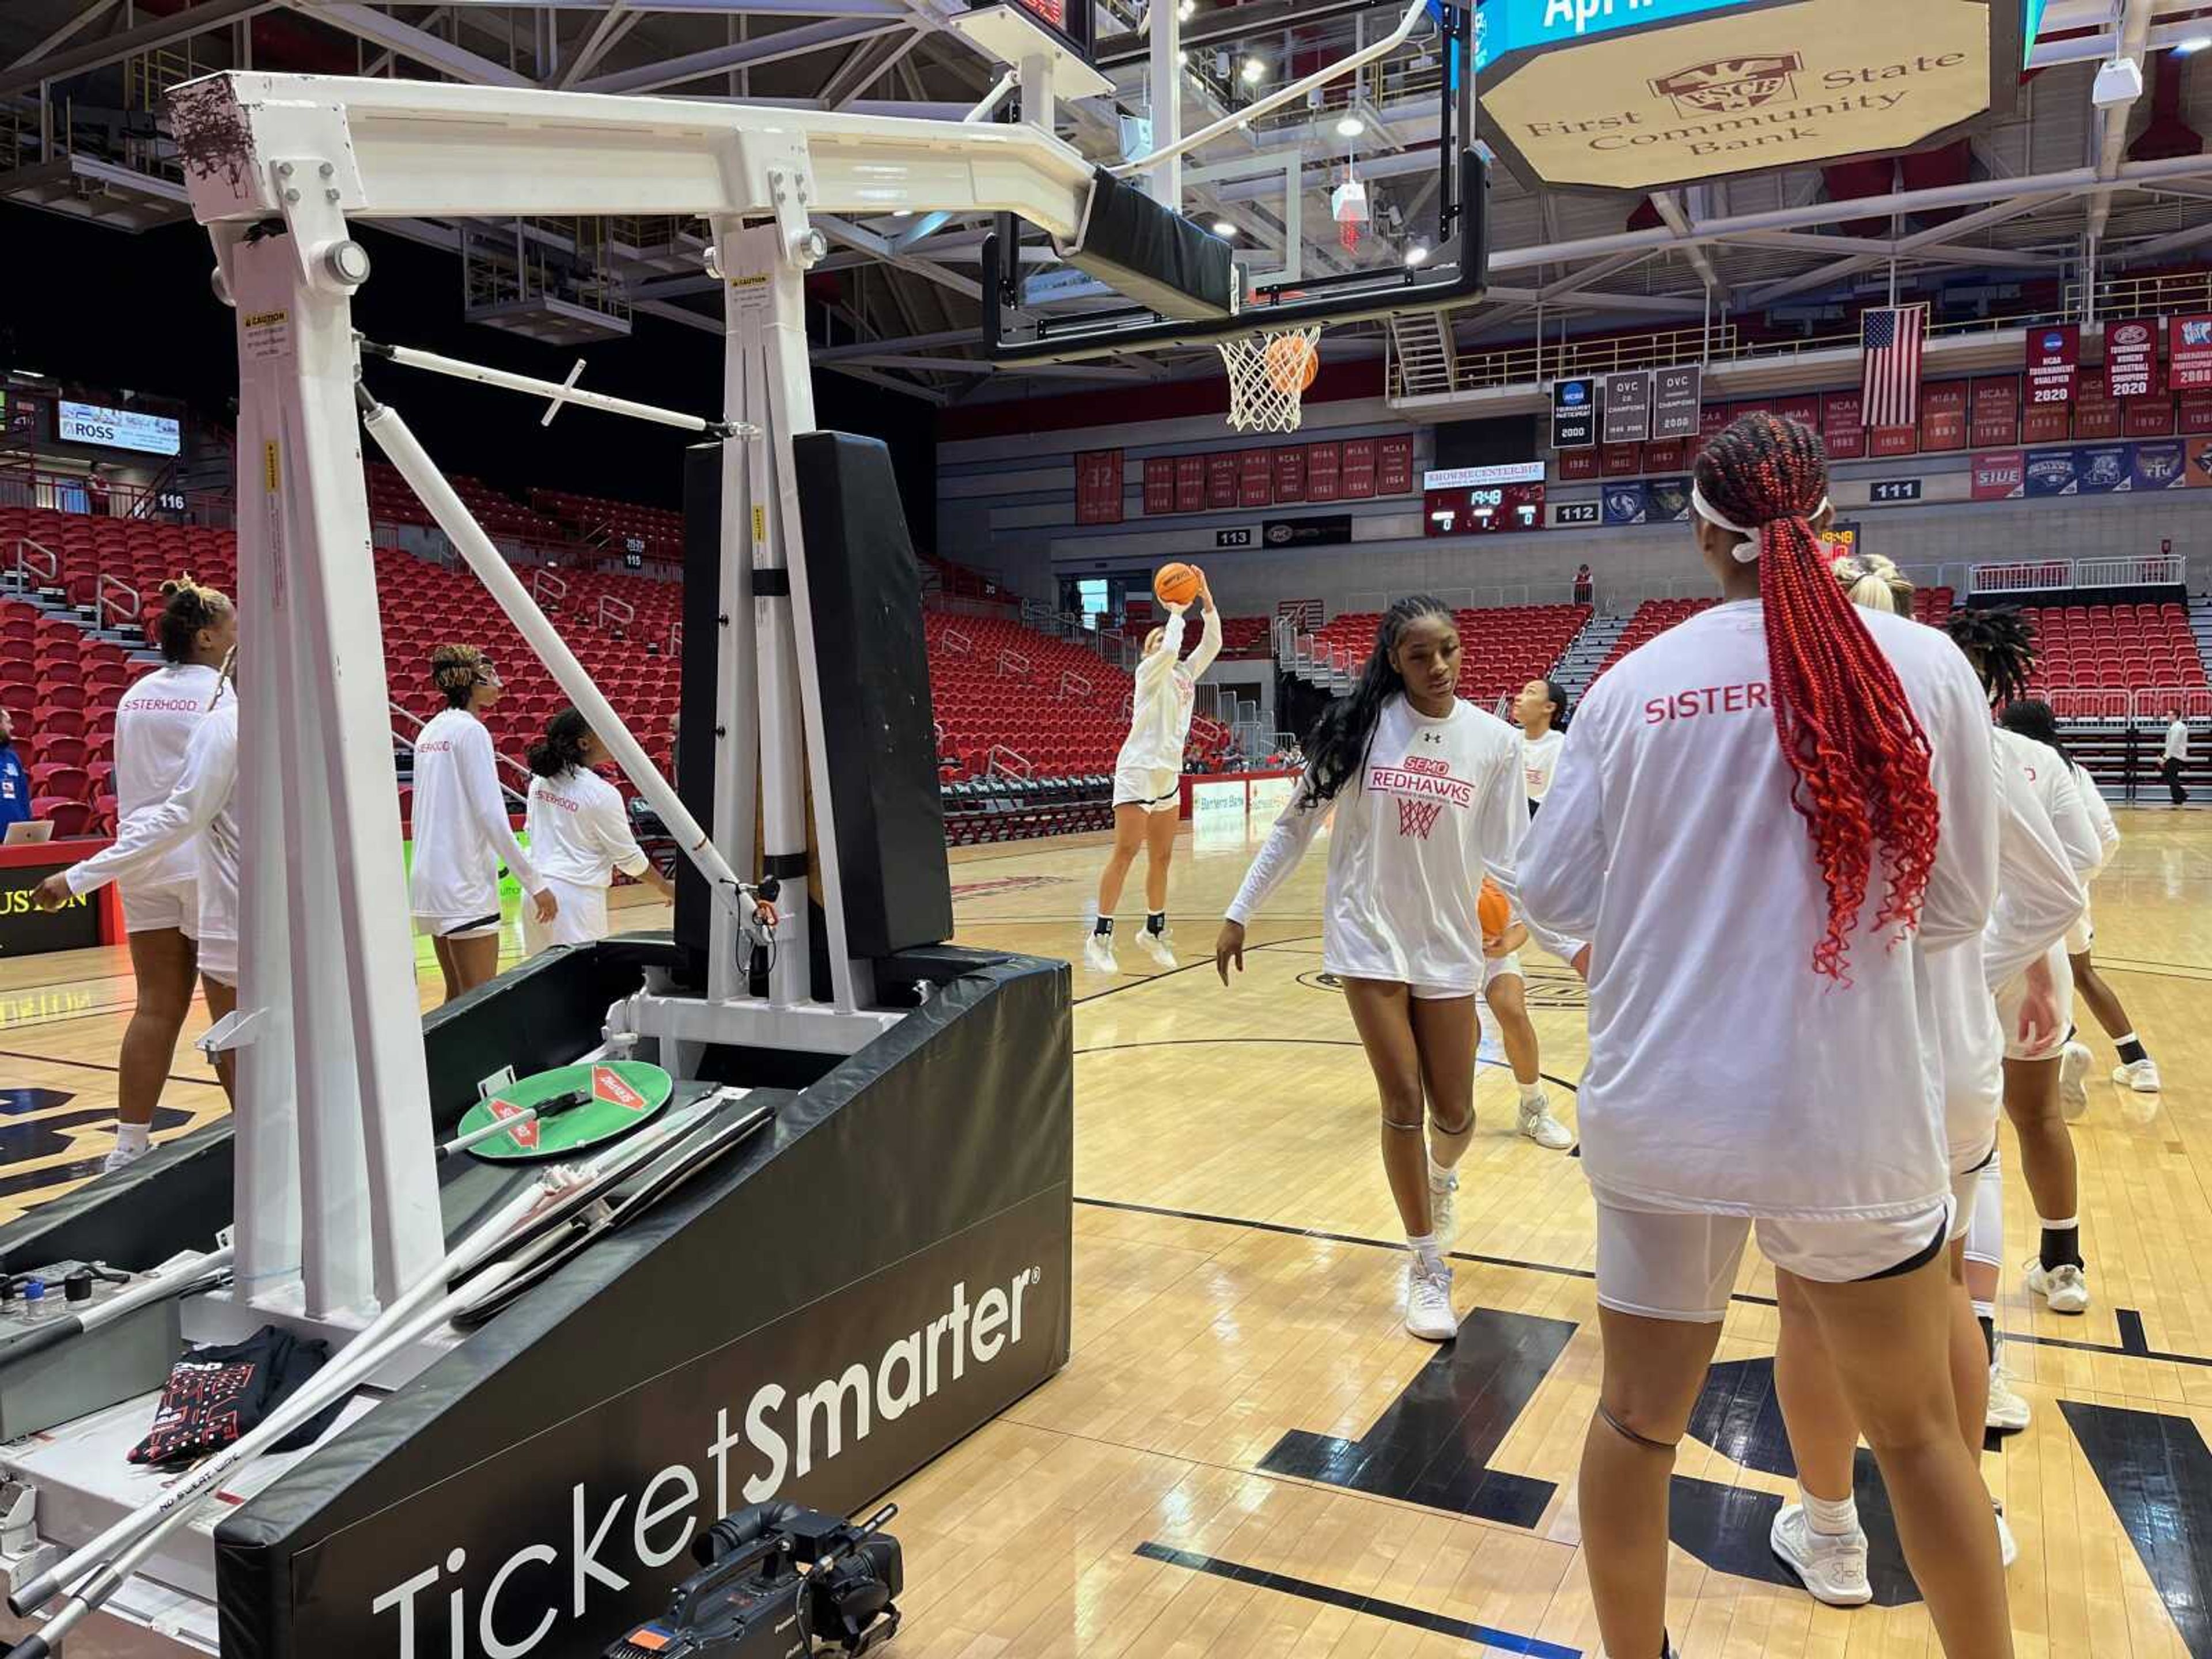 The Redhawks take part in warm-ups before their matchup against Tennessee State on Thursday, January 27. A season high in three-point shots made by the Redhawks propelled them to a 77-59 victory.